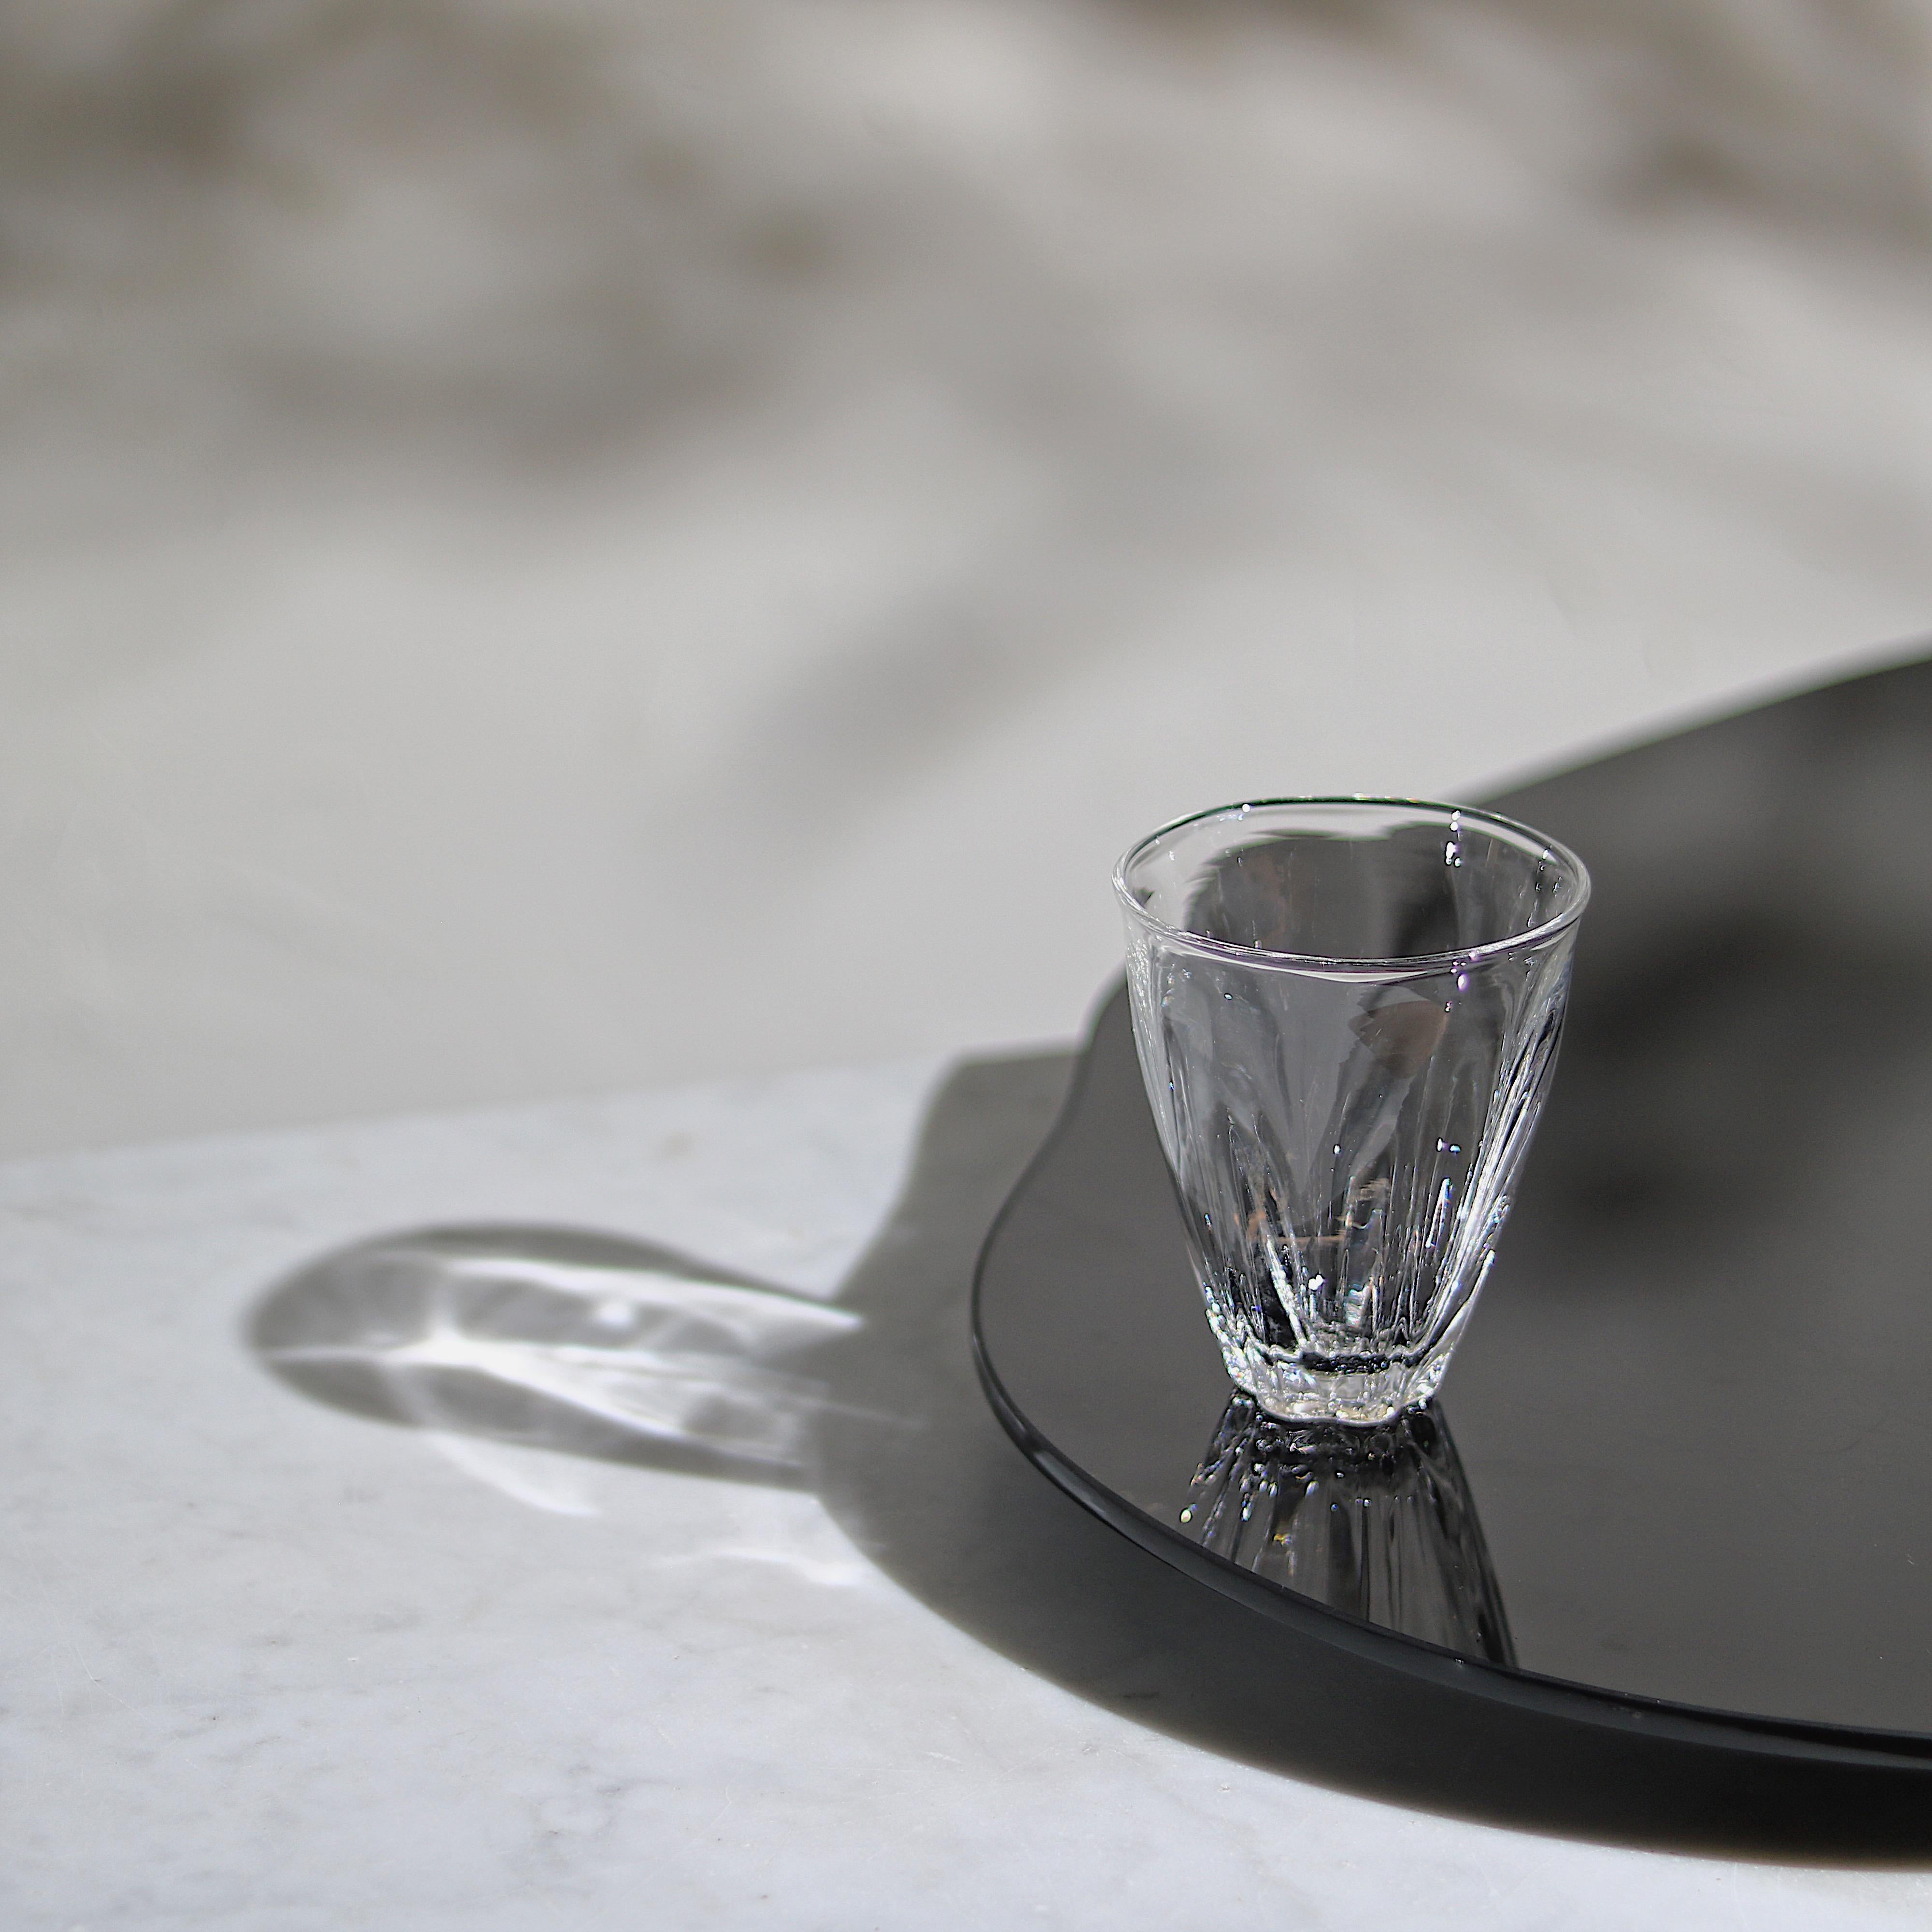 A stackable hand-blown glass that delivers anything from espresso to Dubonnet in the same form fitting silhouette.